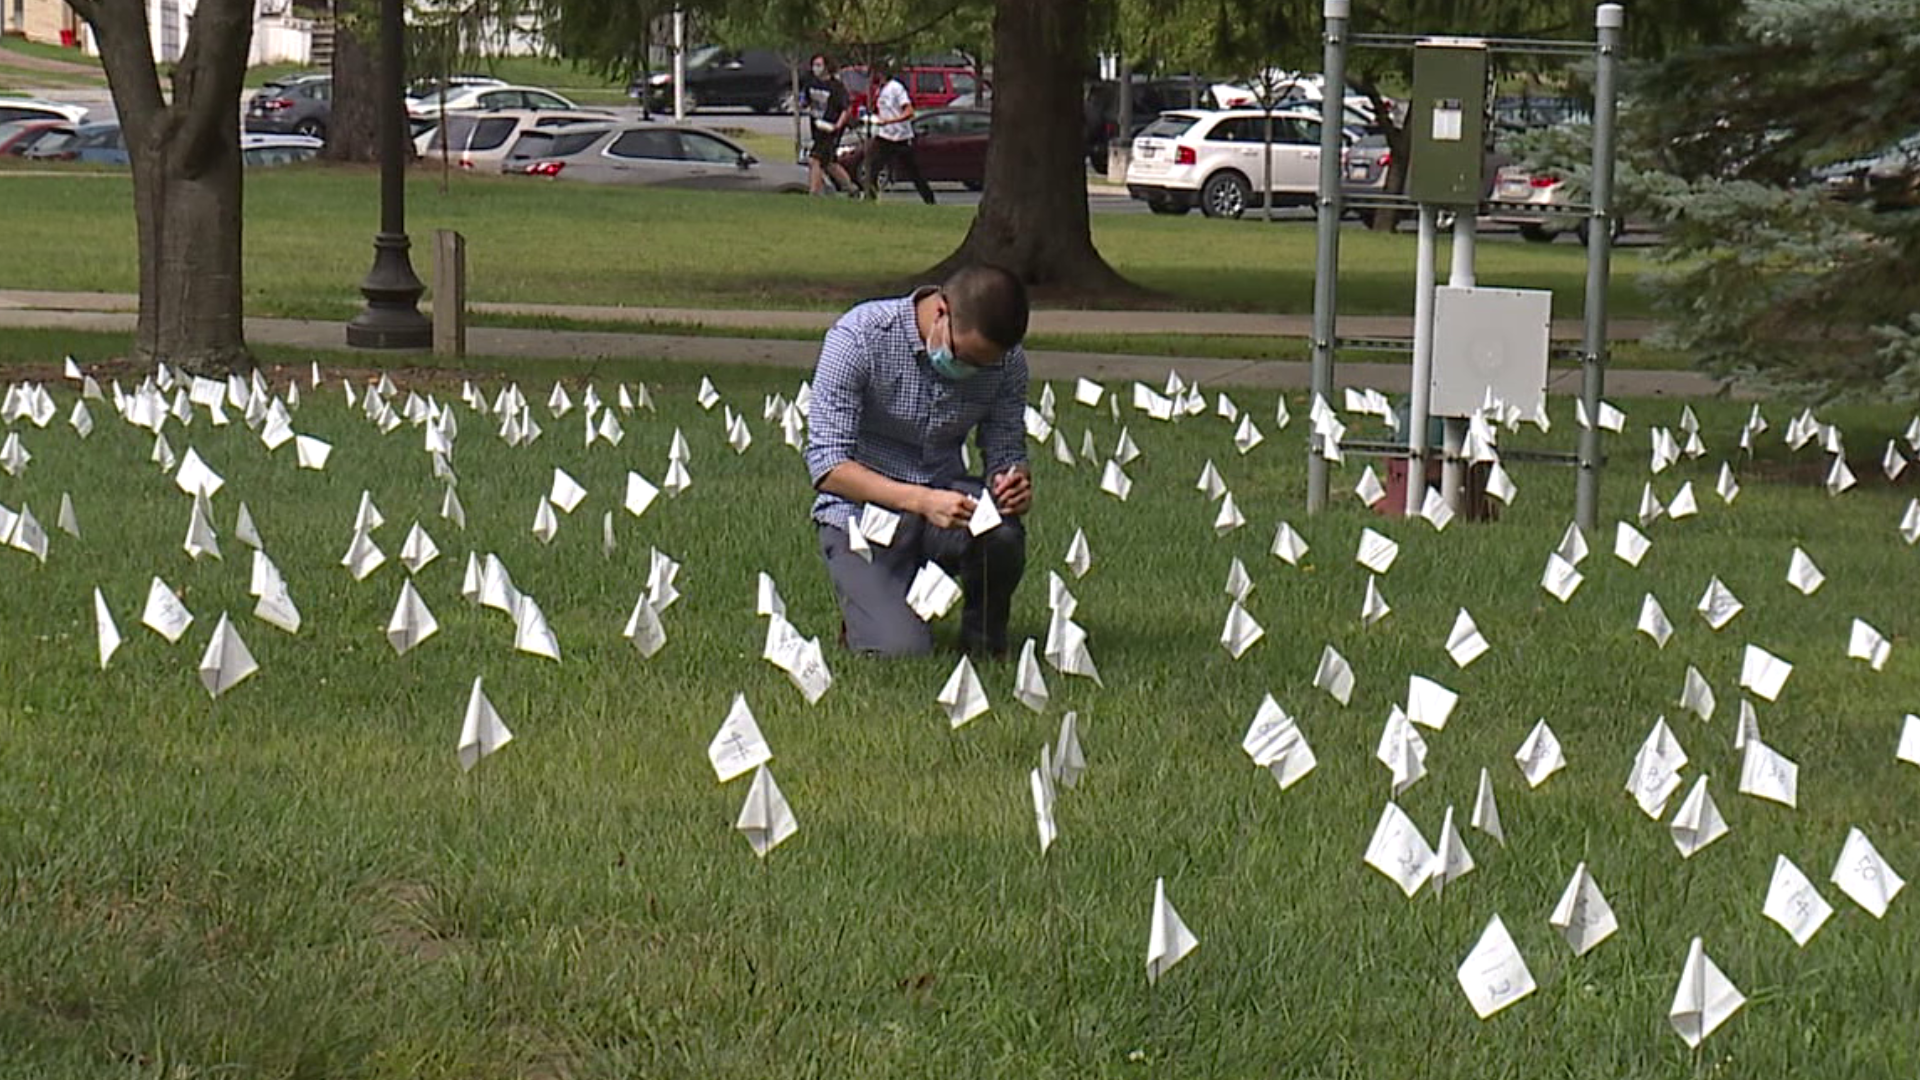 The Field of Memories on Marywood's campus displays white flags to recognize the average number of U.S. college students who commit suicide each year.